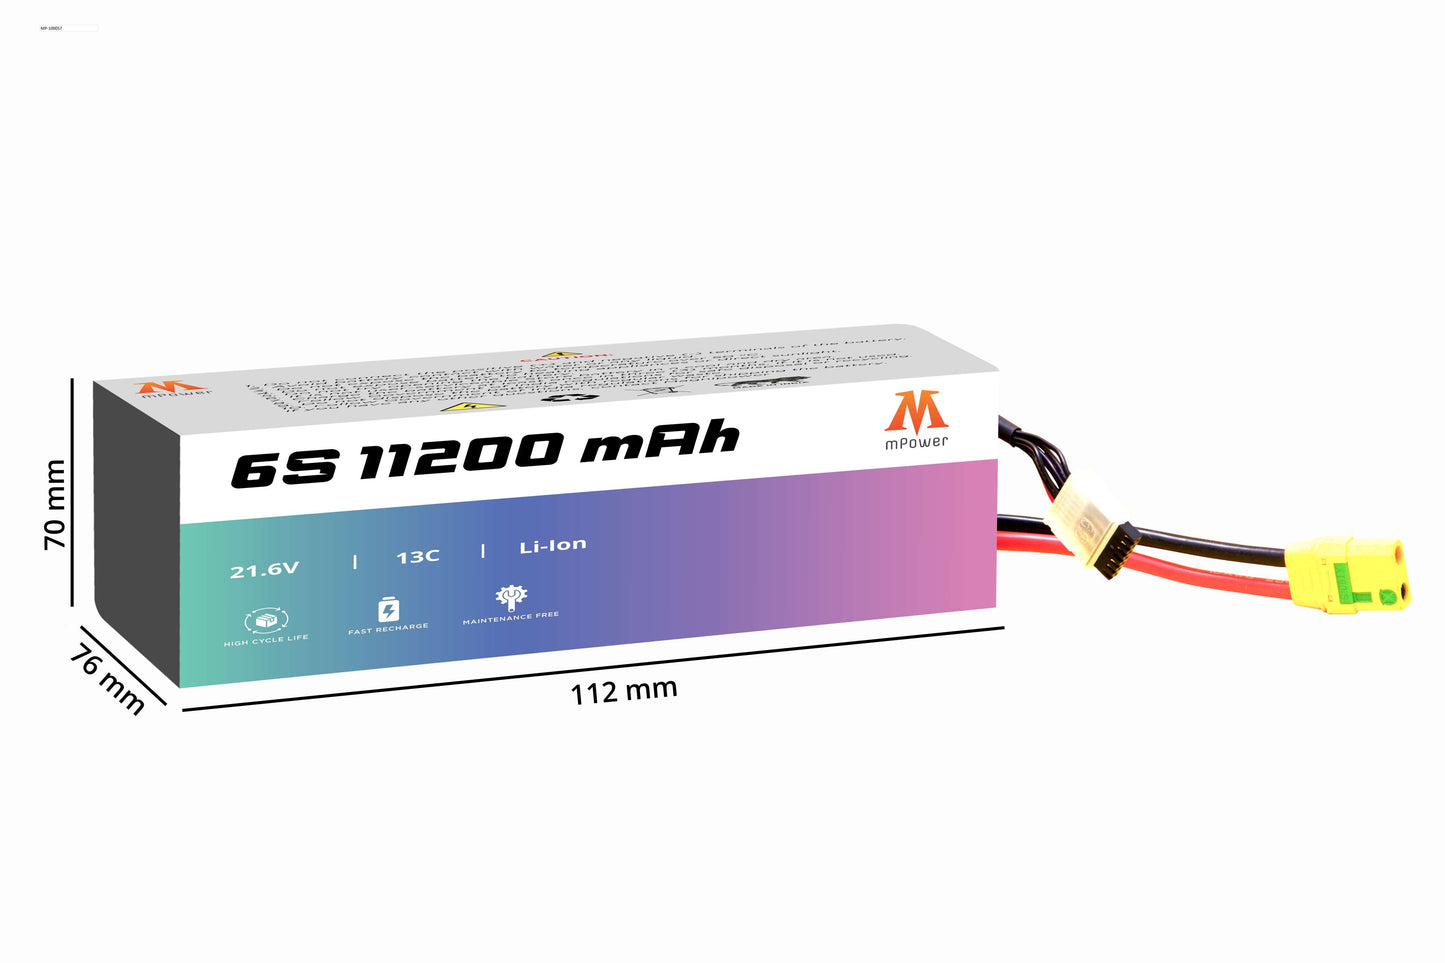 mPower 6S 11200mAh Lithium-Ion Battery for Surveillance Drones